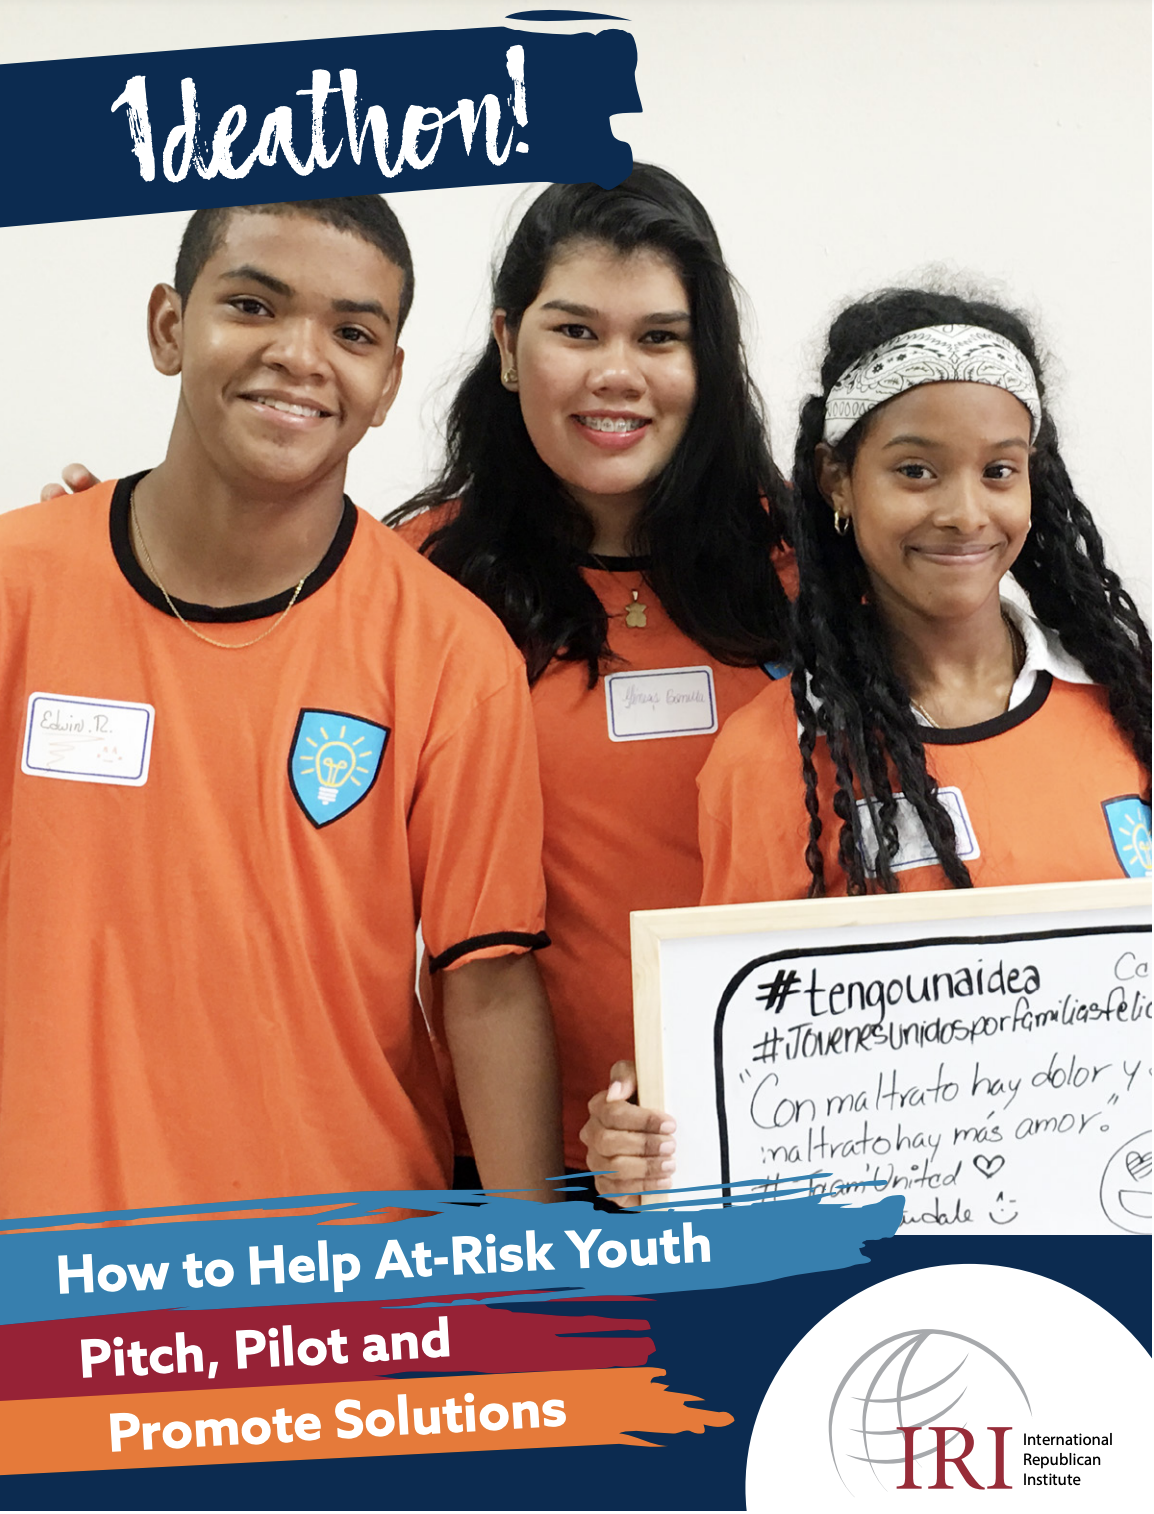 Ideathon: How to Help At-Risk Youth Pitch, Pilot, and Promote Solutions